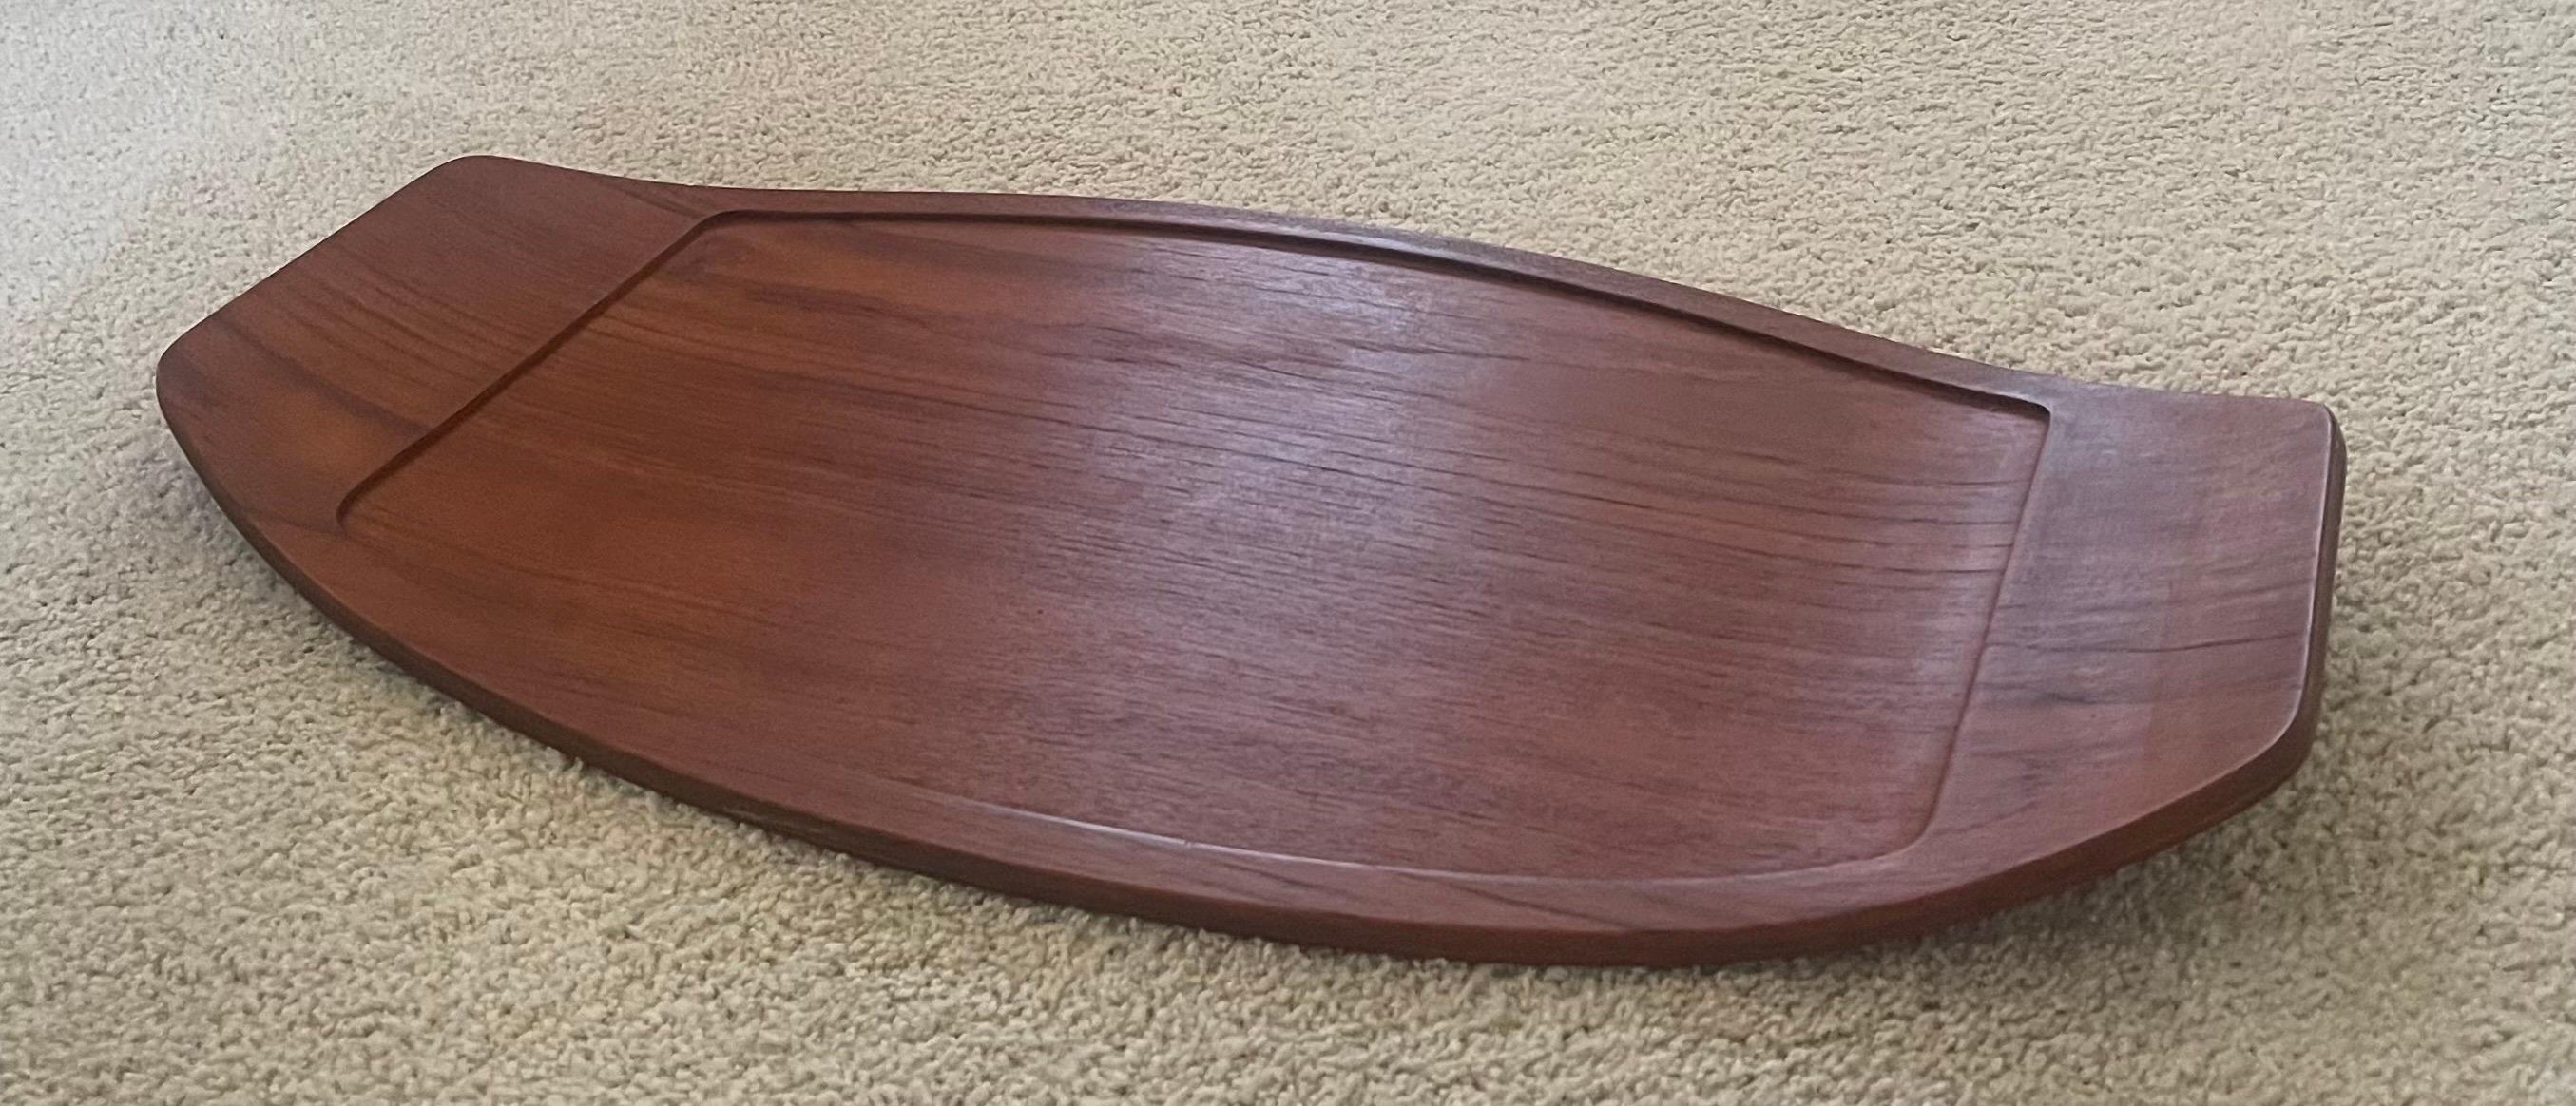 Large Solid Teak Surfboard Tray with Raised Edge by Digsmed - Rare For Sale 5